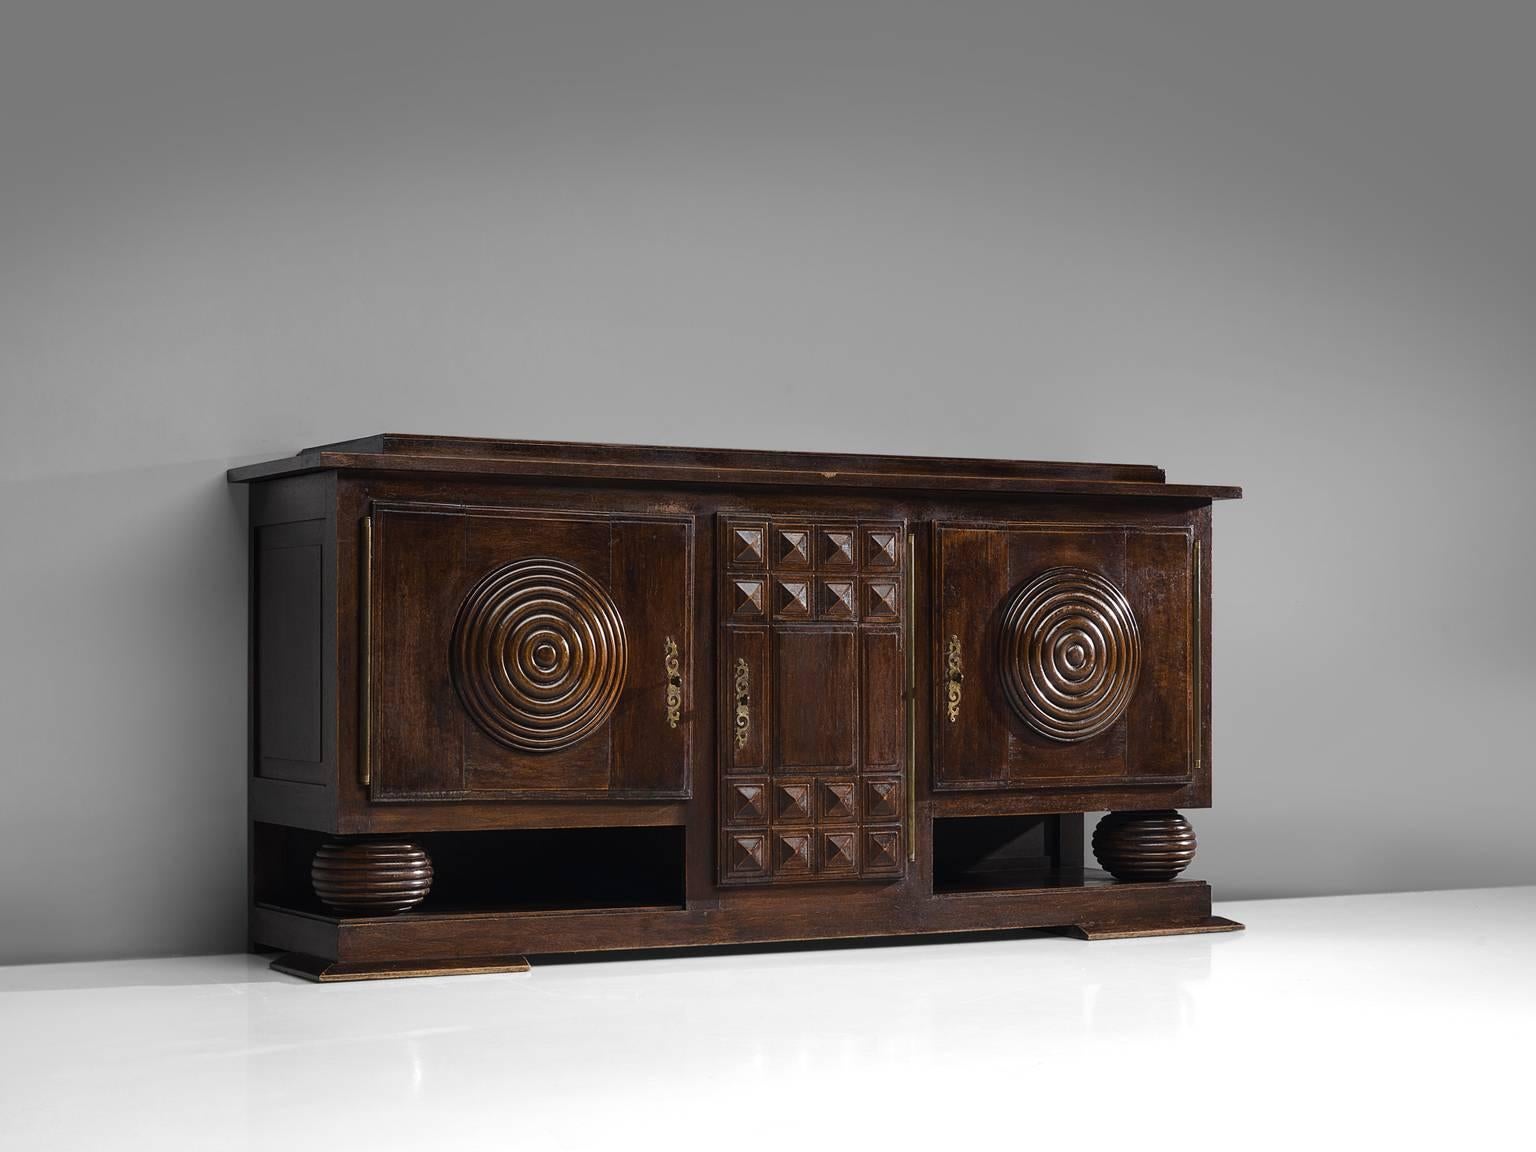 Charles Dudouyt, credenza, wood, circa 1925.

This sturdy credenza in oak with cilinder wood work is a truly sculptural piece. This two-door sideboard is equipped with several shelves and drawers which provide plenty of storage space. The